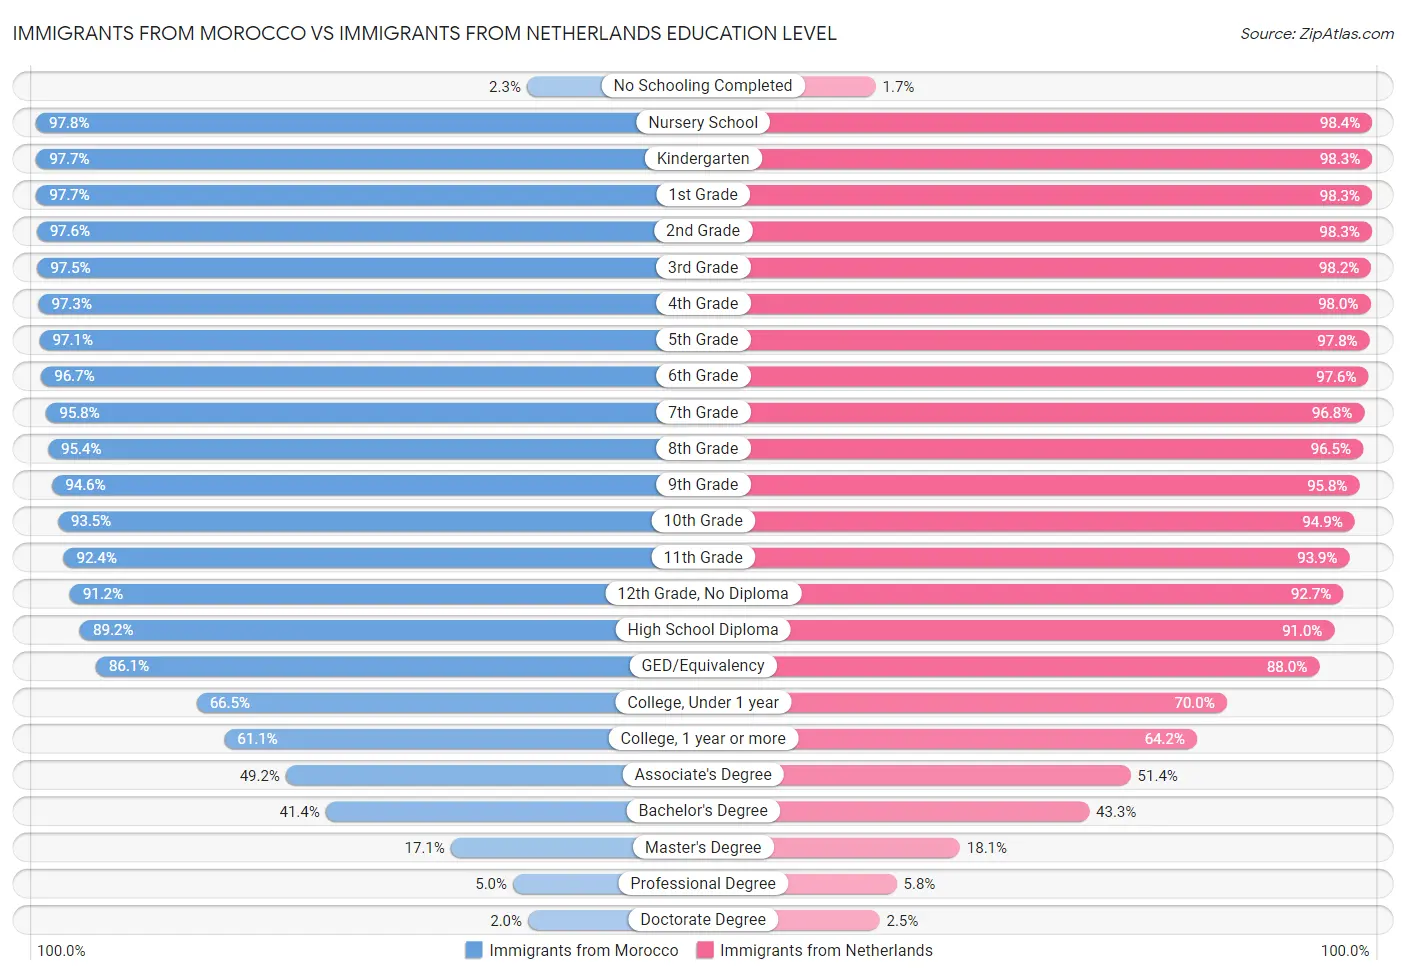 Immigrants from Morocco vs Immigrants from Netherlands Education Level